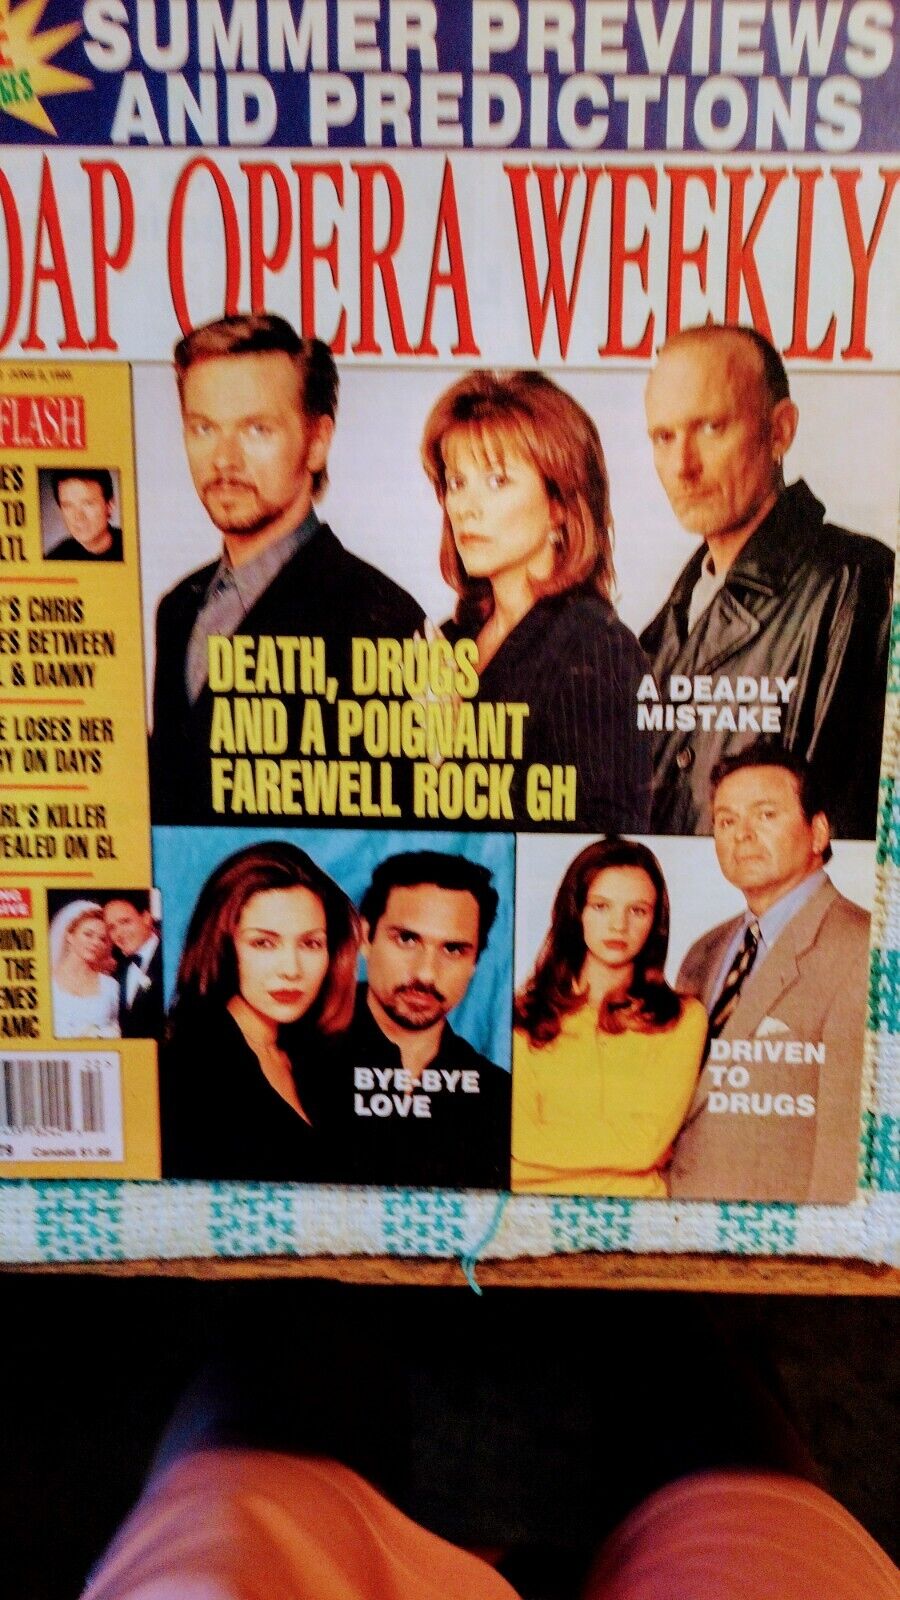 SOAP OPERA WEEKLY JUNE 2 1998 DEADLY MISTAKE ON GH Без бренда 1047-7128